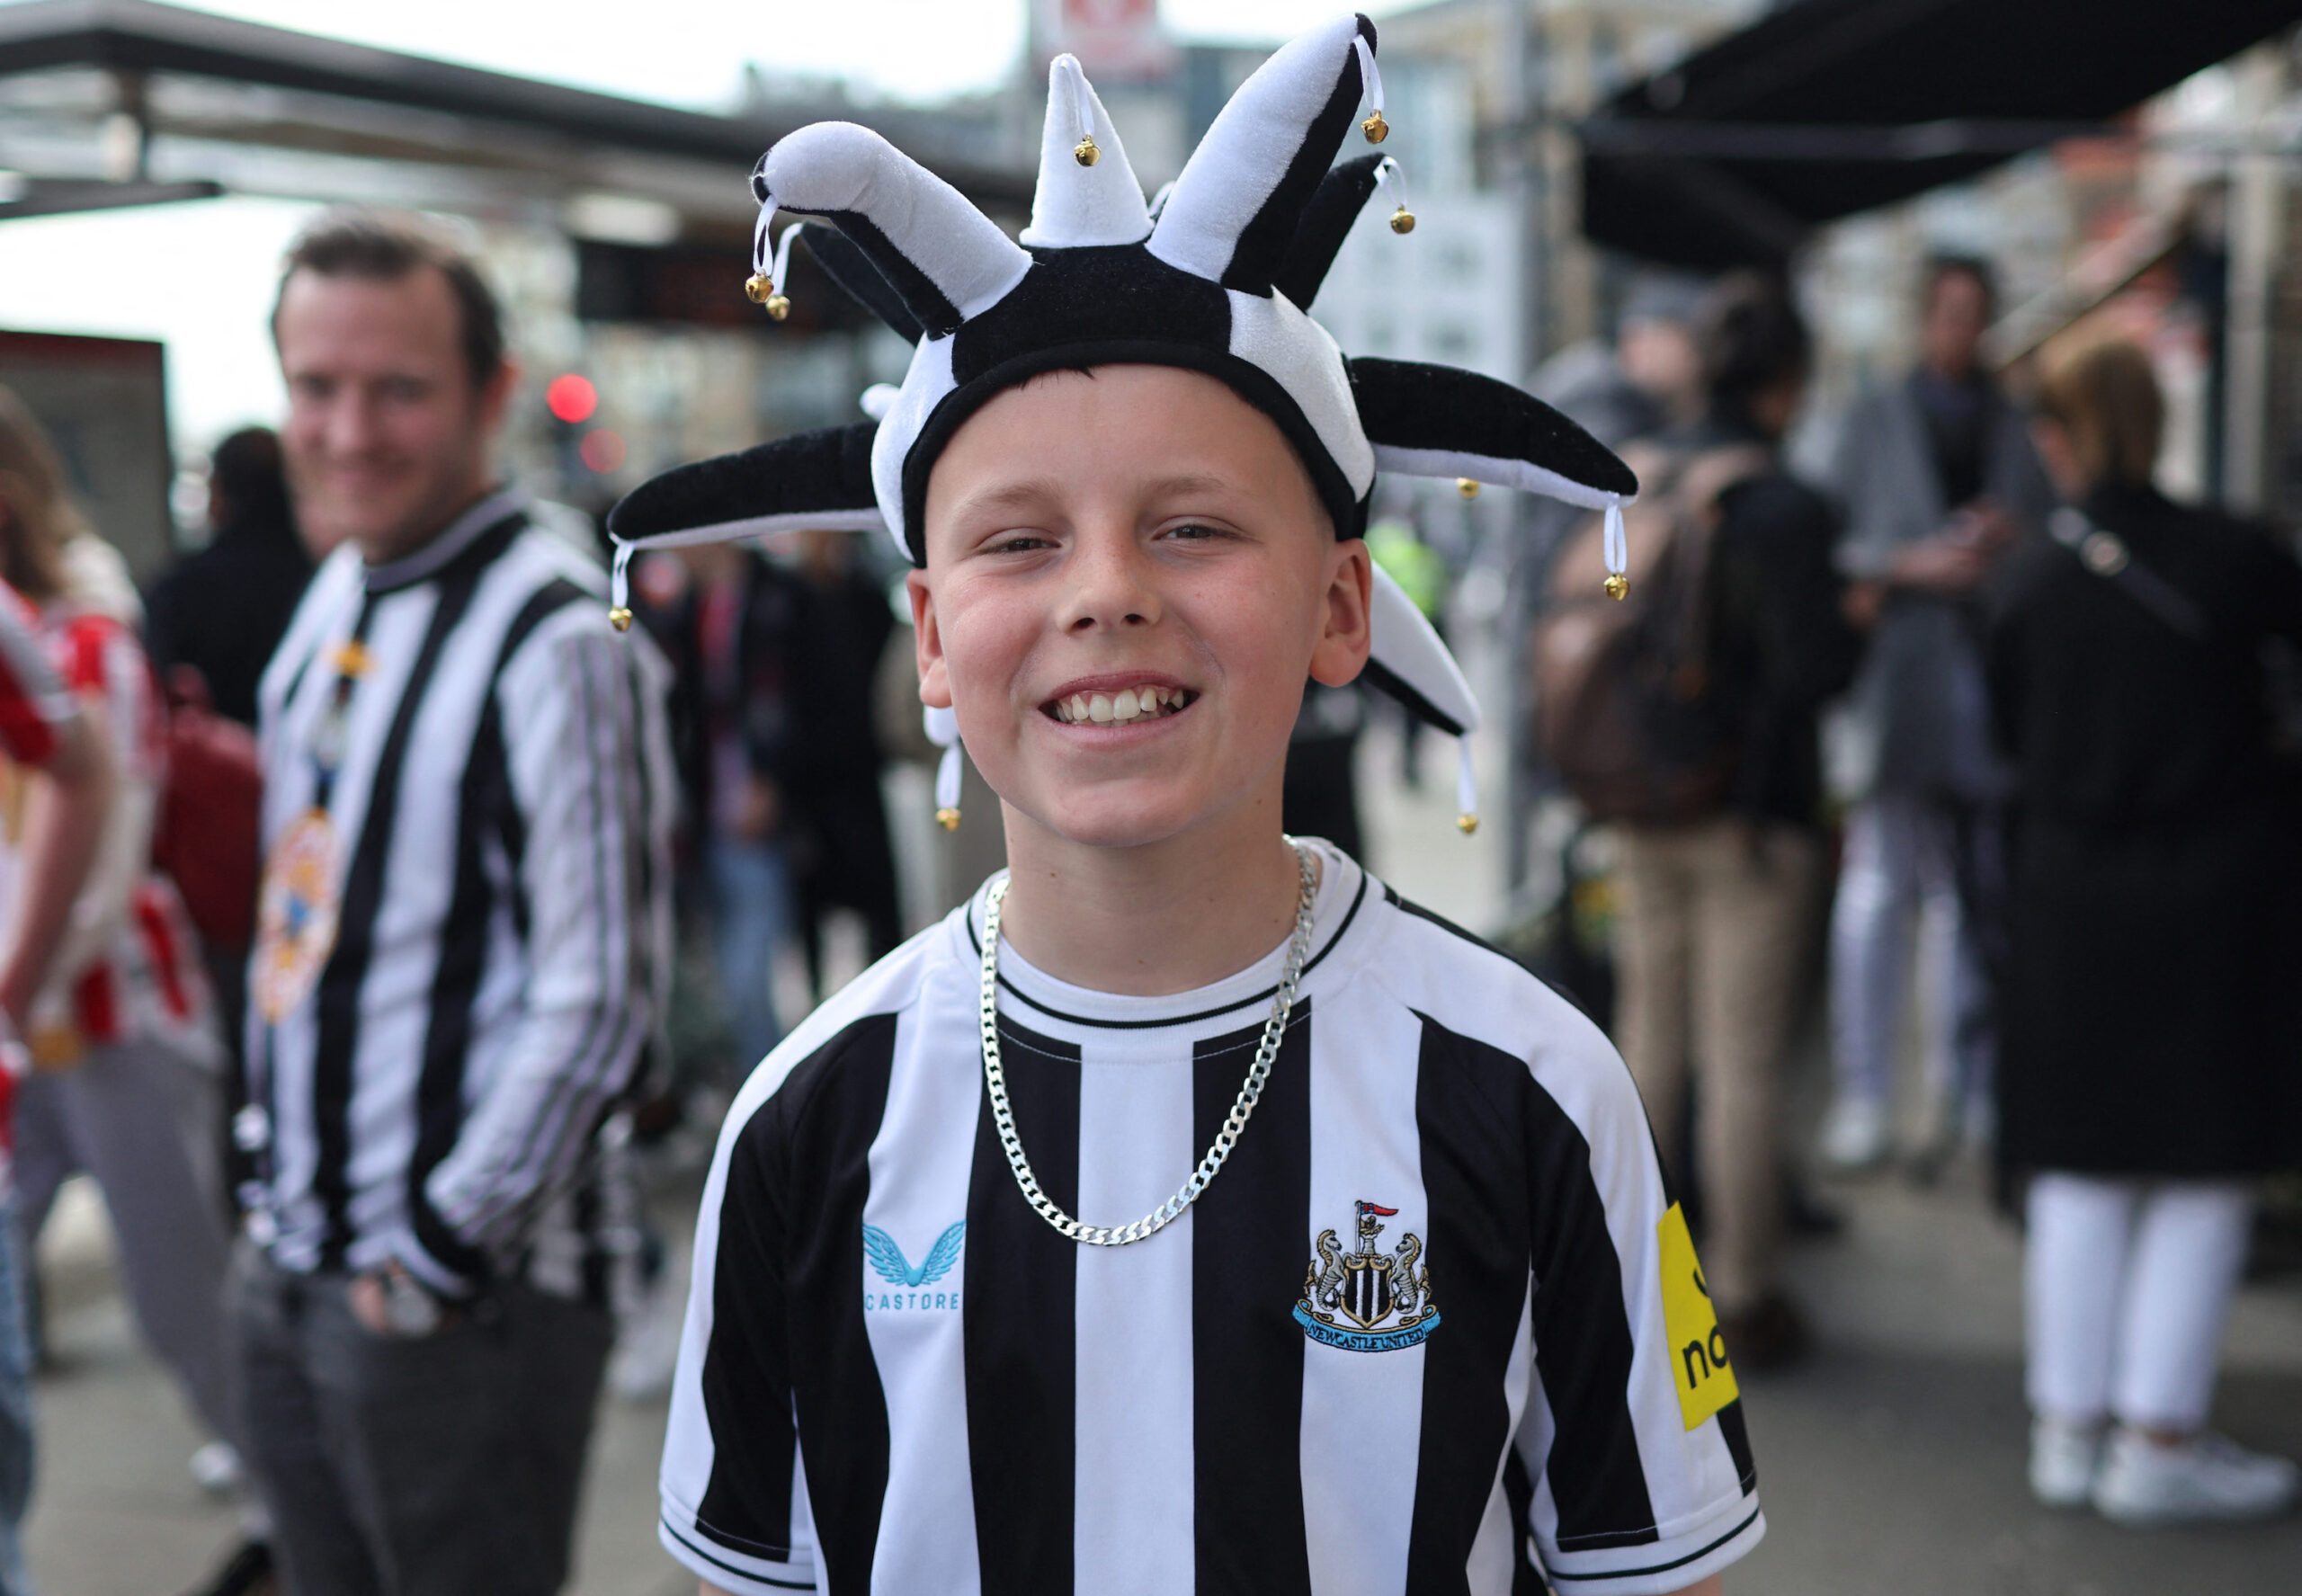 Newcastle United fans are renowned for their passion and allegiance - clubs should use this power to make positive change